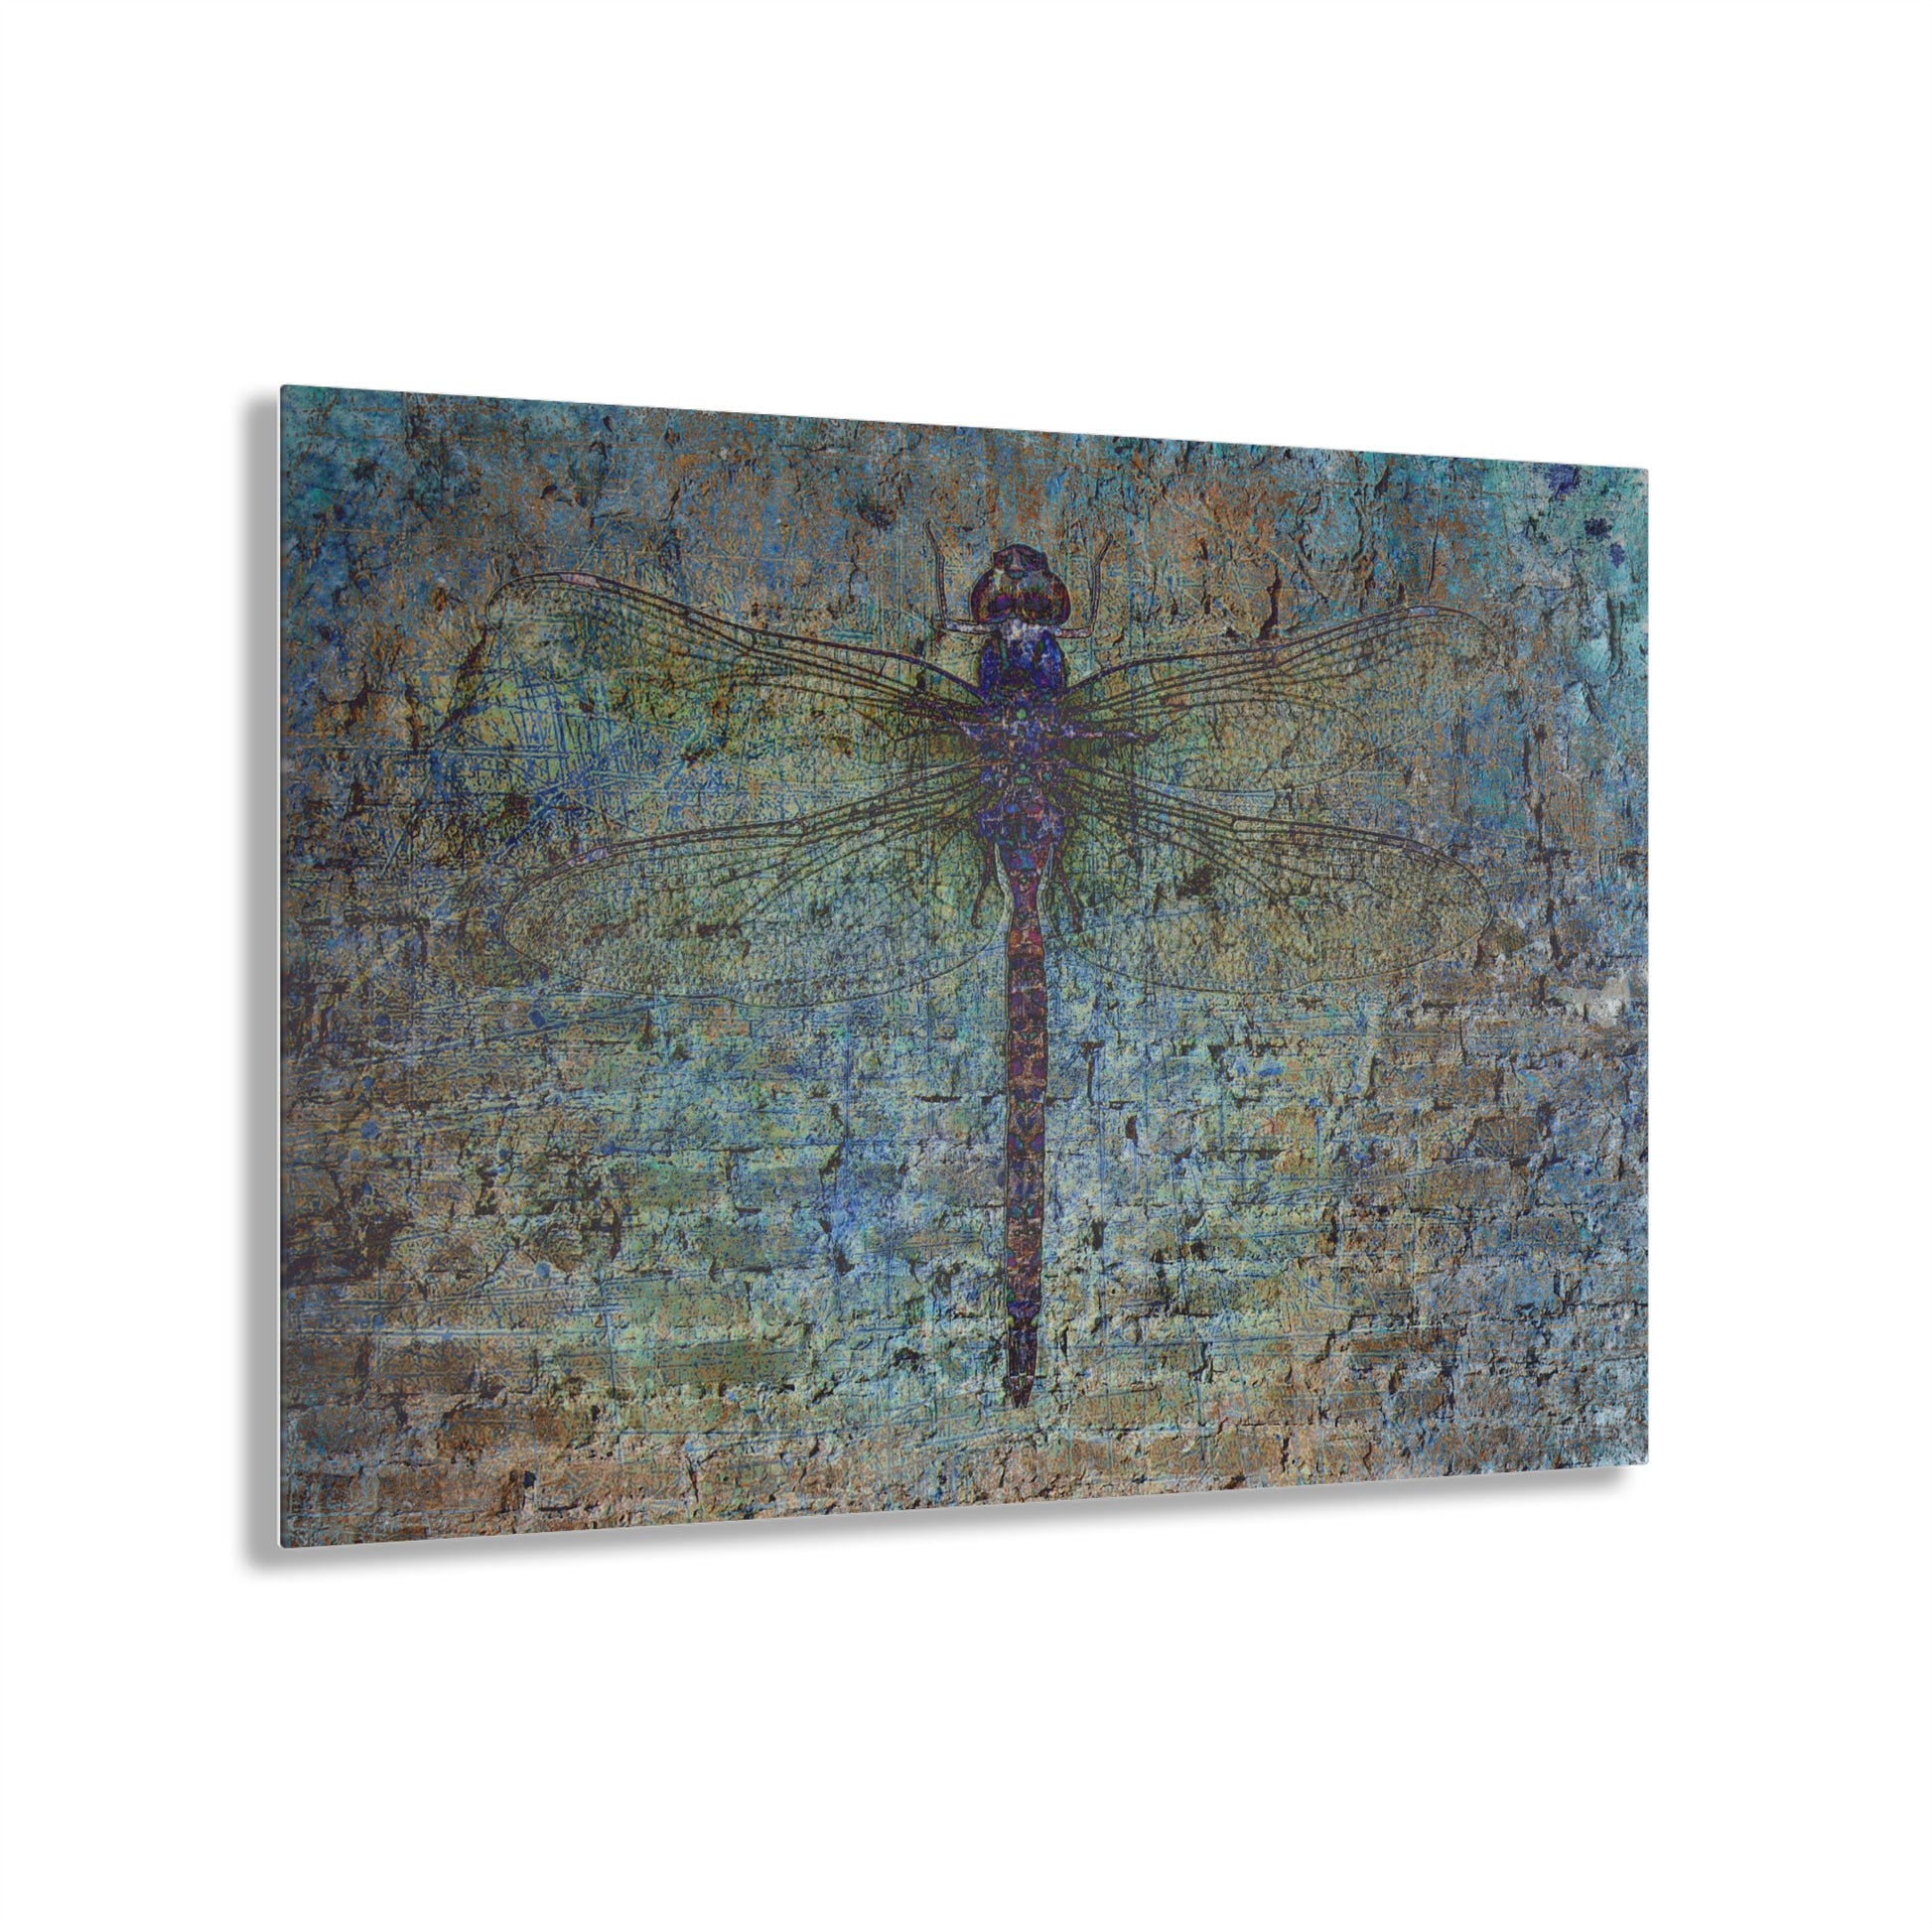 Dragonfly on Distressed Multicolor Brick Wall Printed on a Crystal Clear Acrylic Panel 20x16